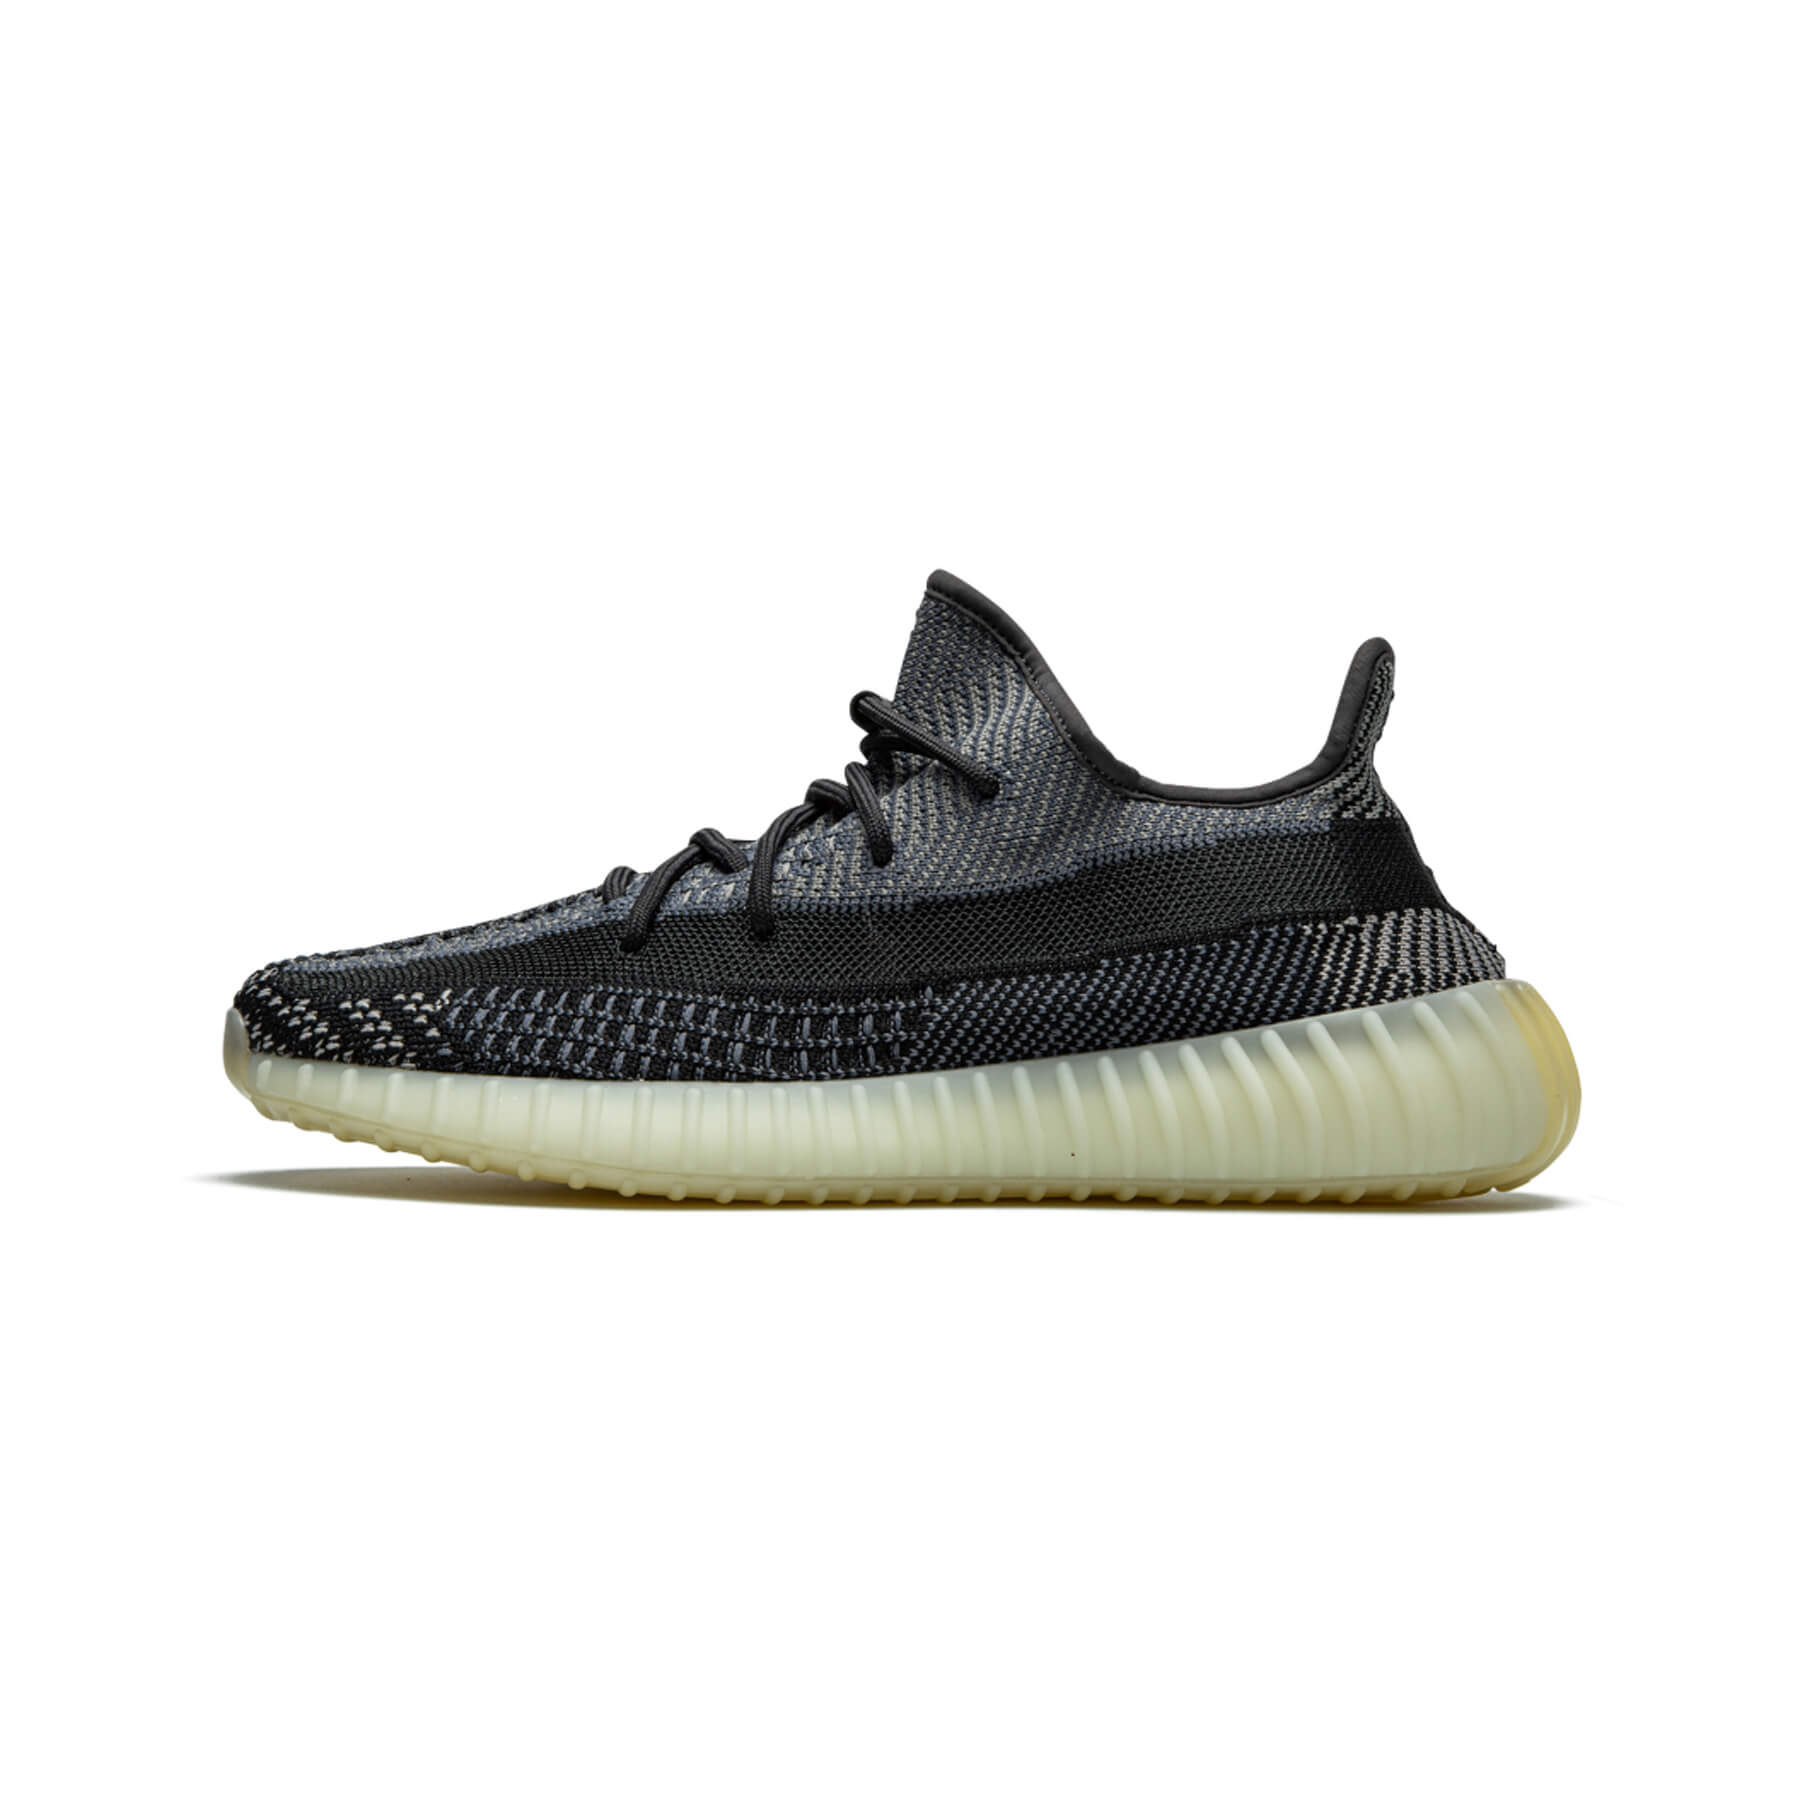 Yeezy Boost 350 V2 Carbon - Fast Delivery